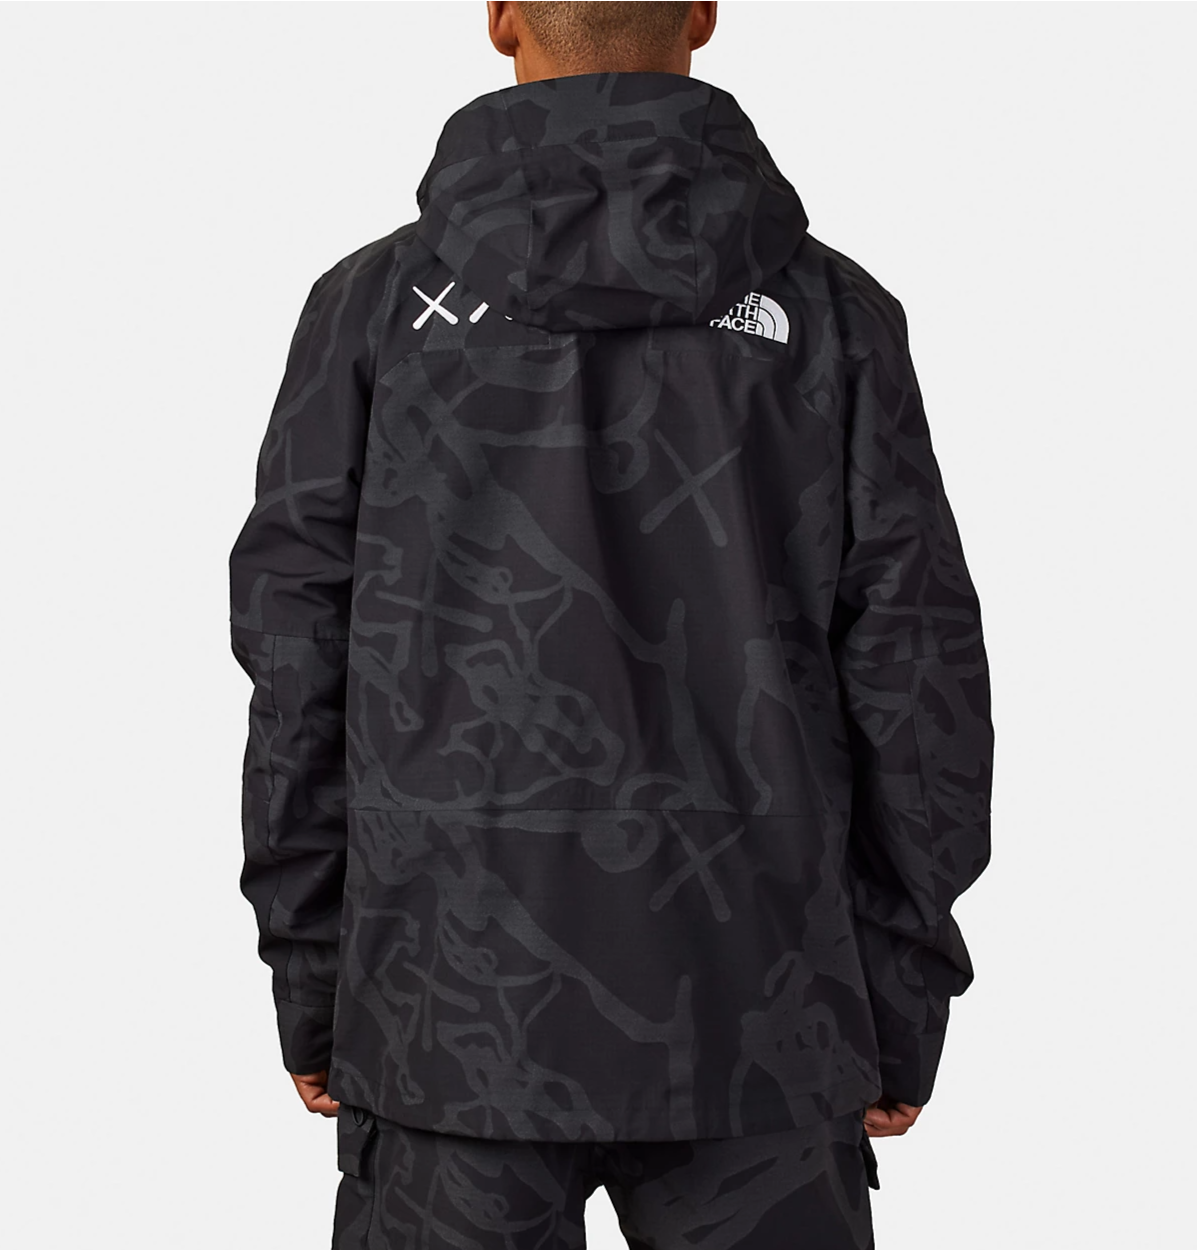 Double Boxed hoodie 599.99 KAWS x The North Face Freeride Jacket Black Dragline Print Double Boxed